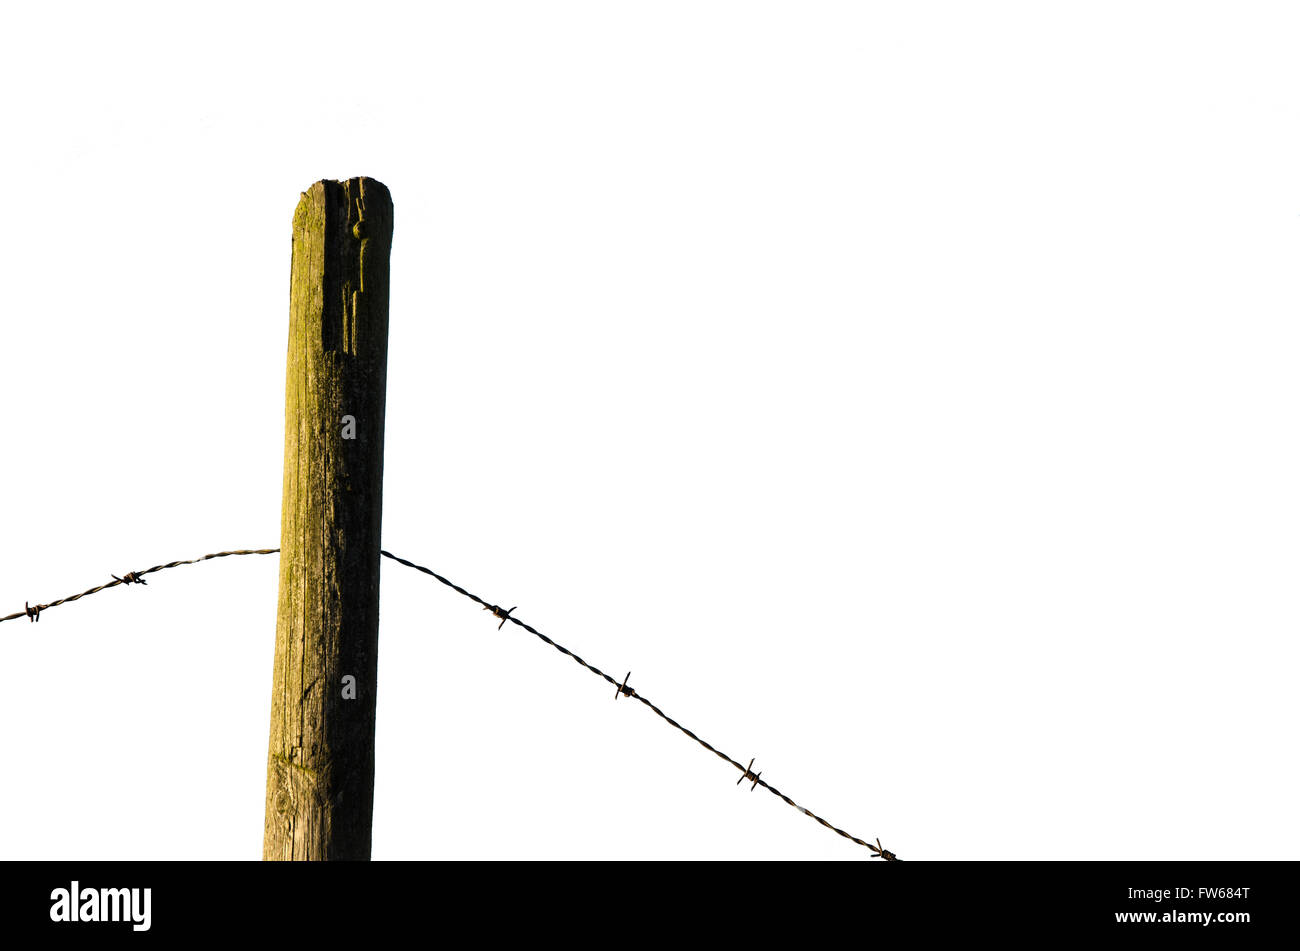 Fence post with old barb wire isolated on white background Stock Photo